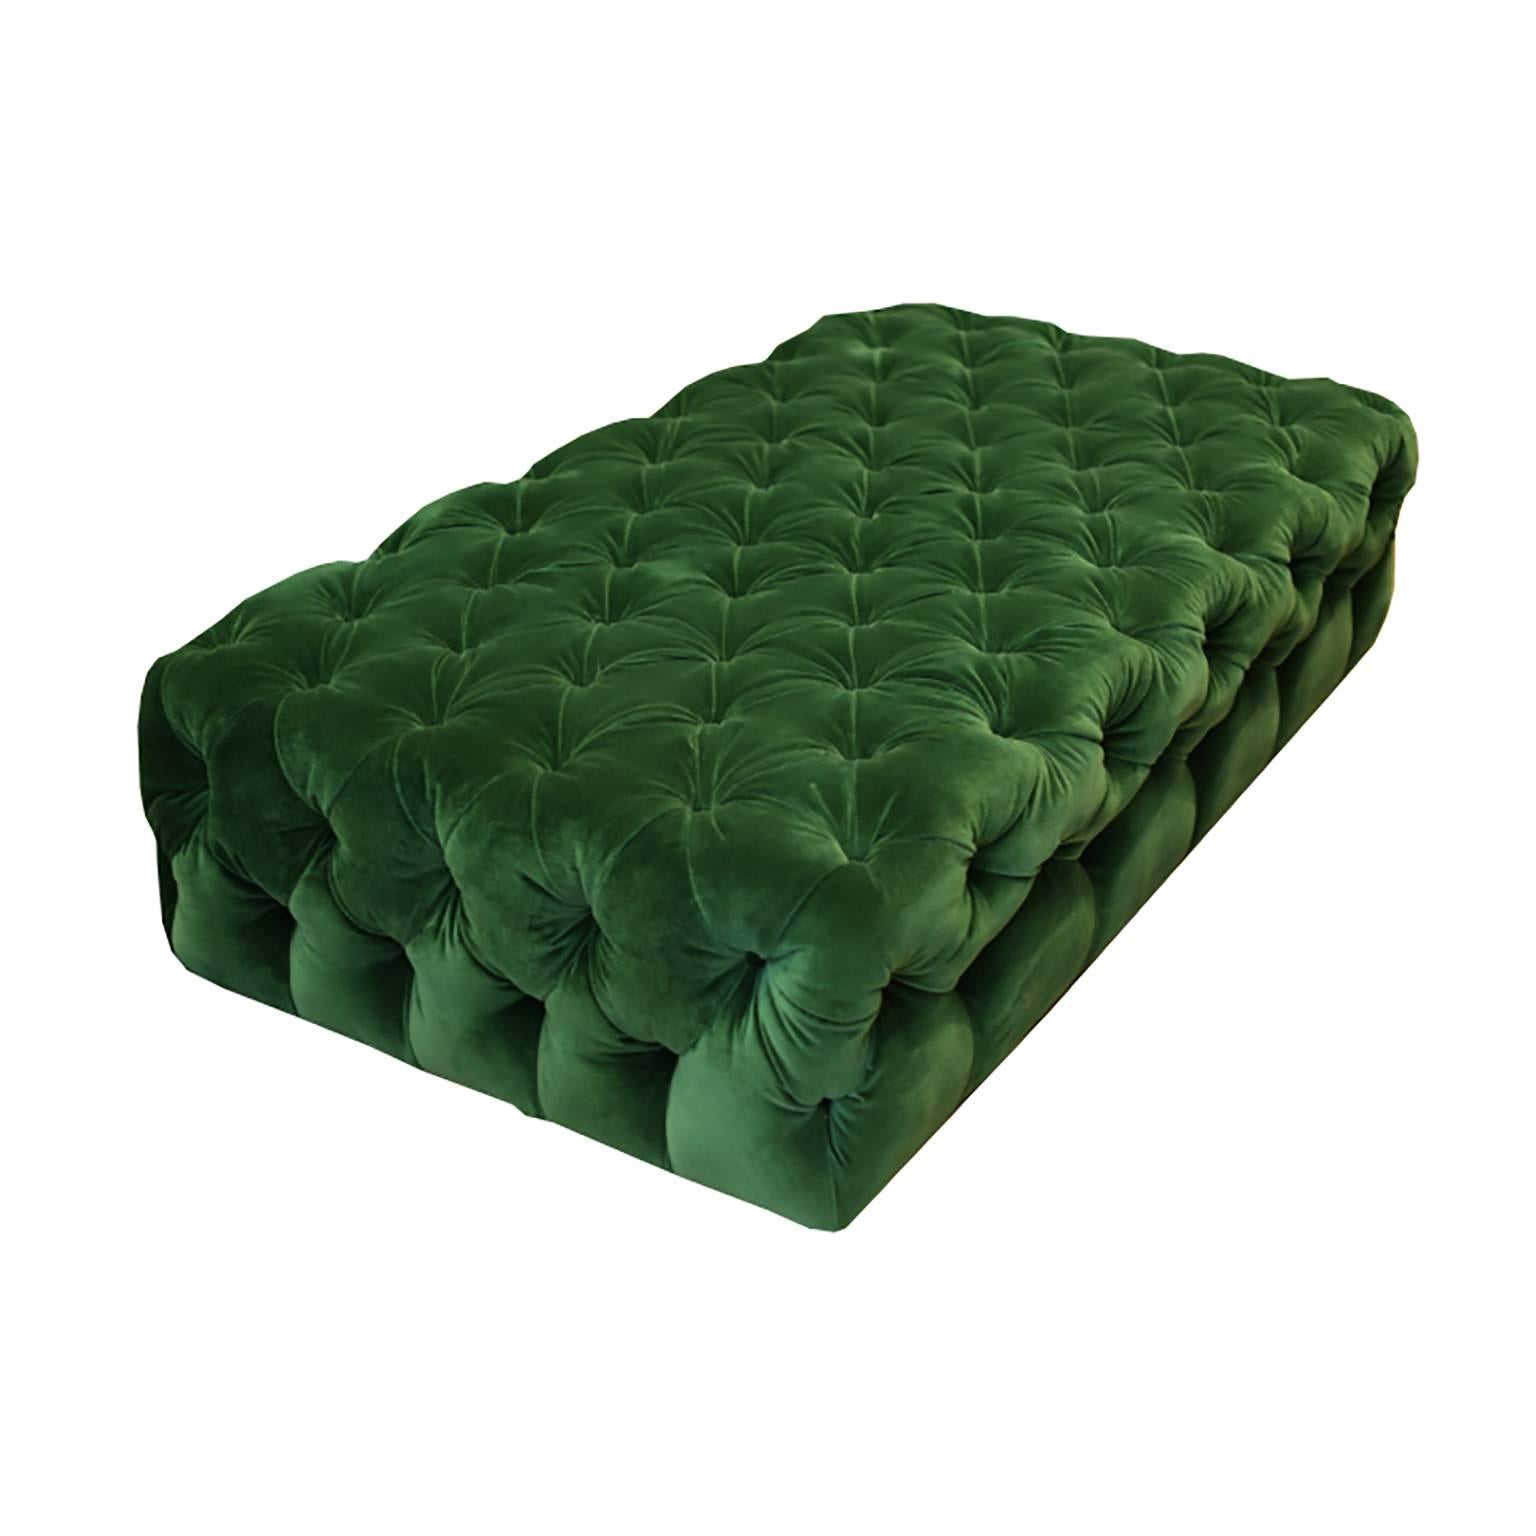 Large Tufted Green Velvet Ottoman by Plantation and Room and Board, circa 2015